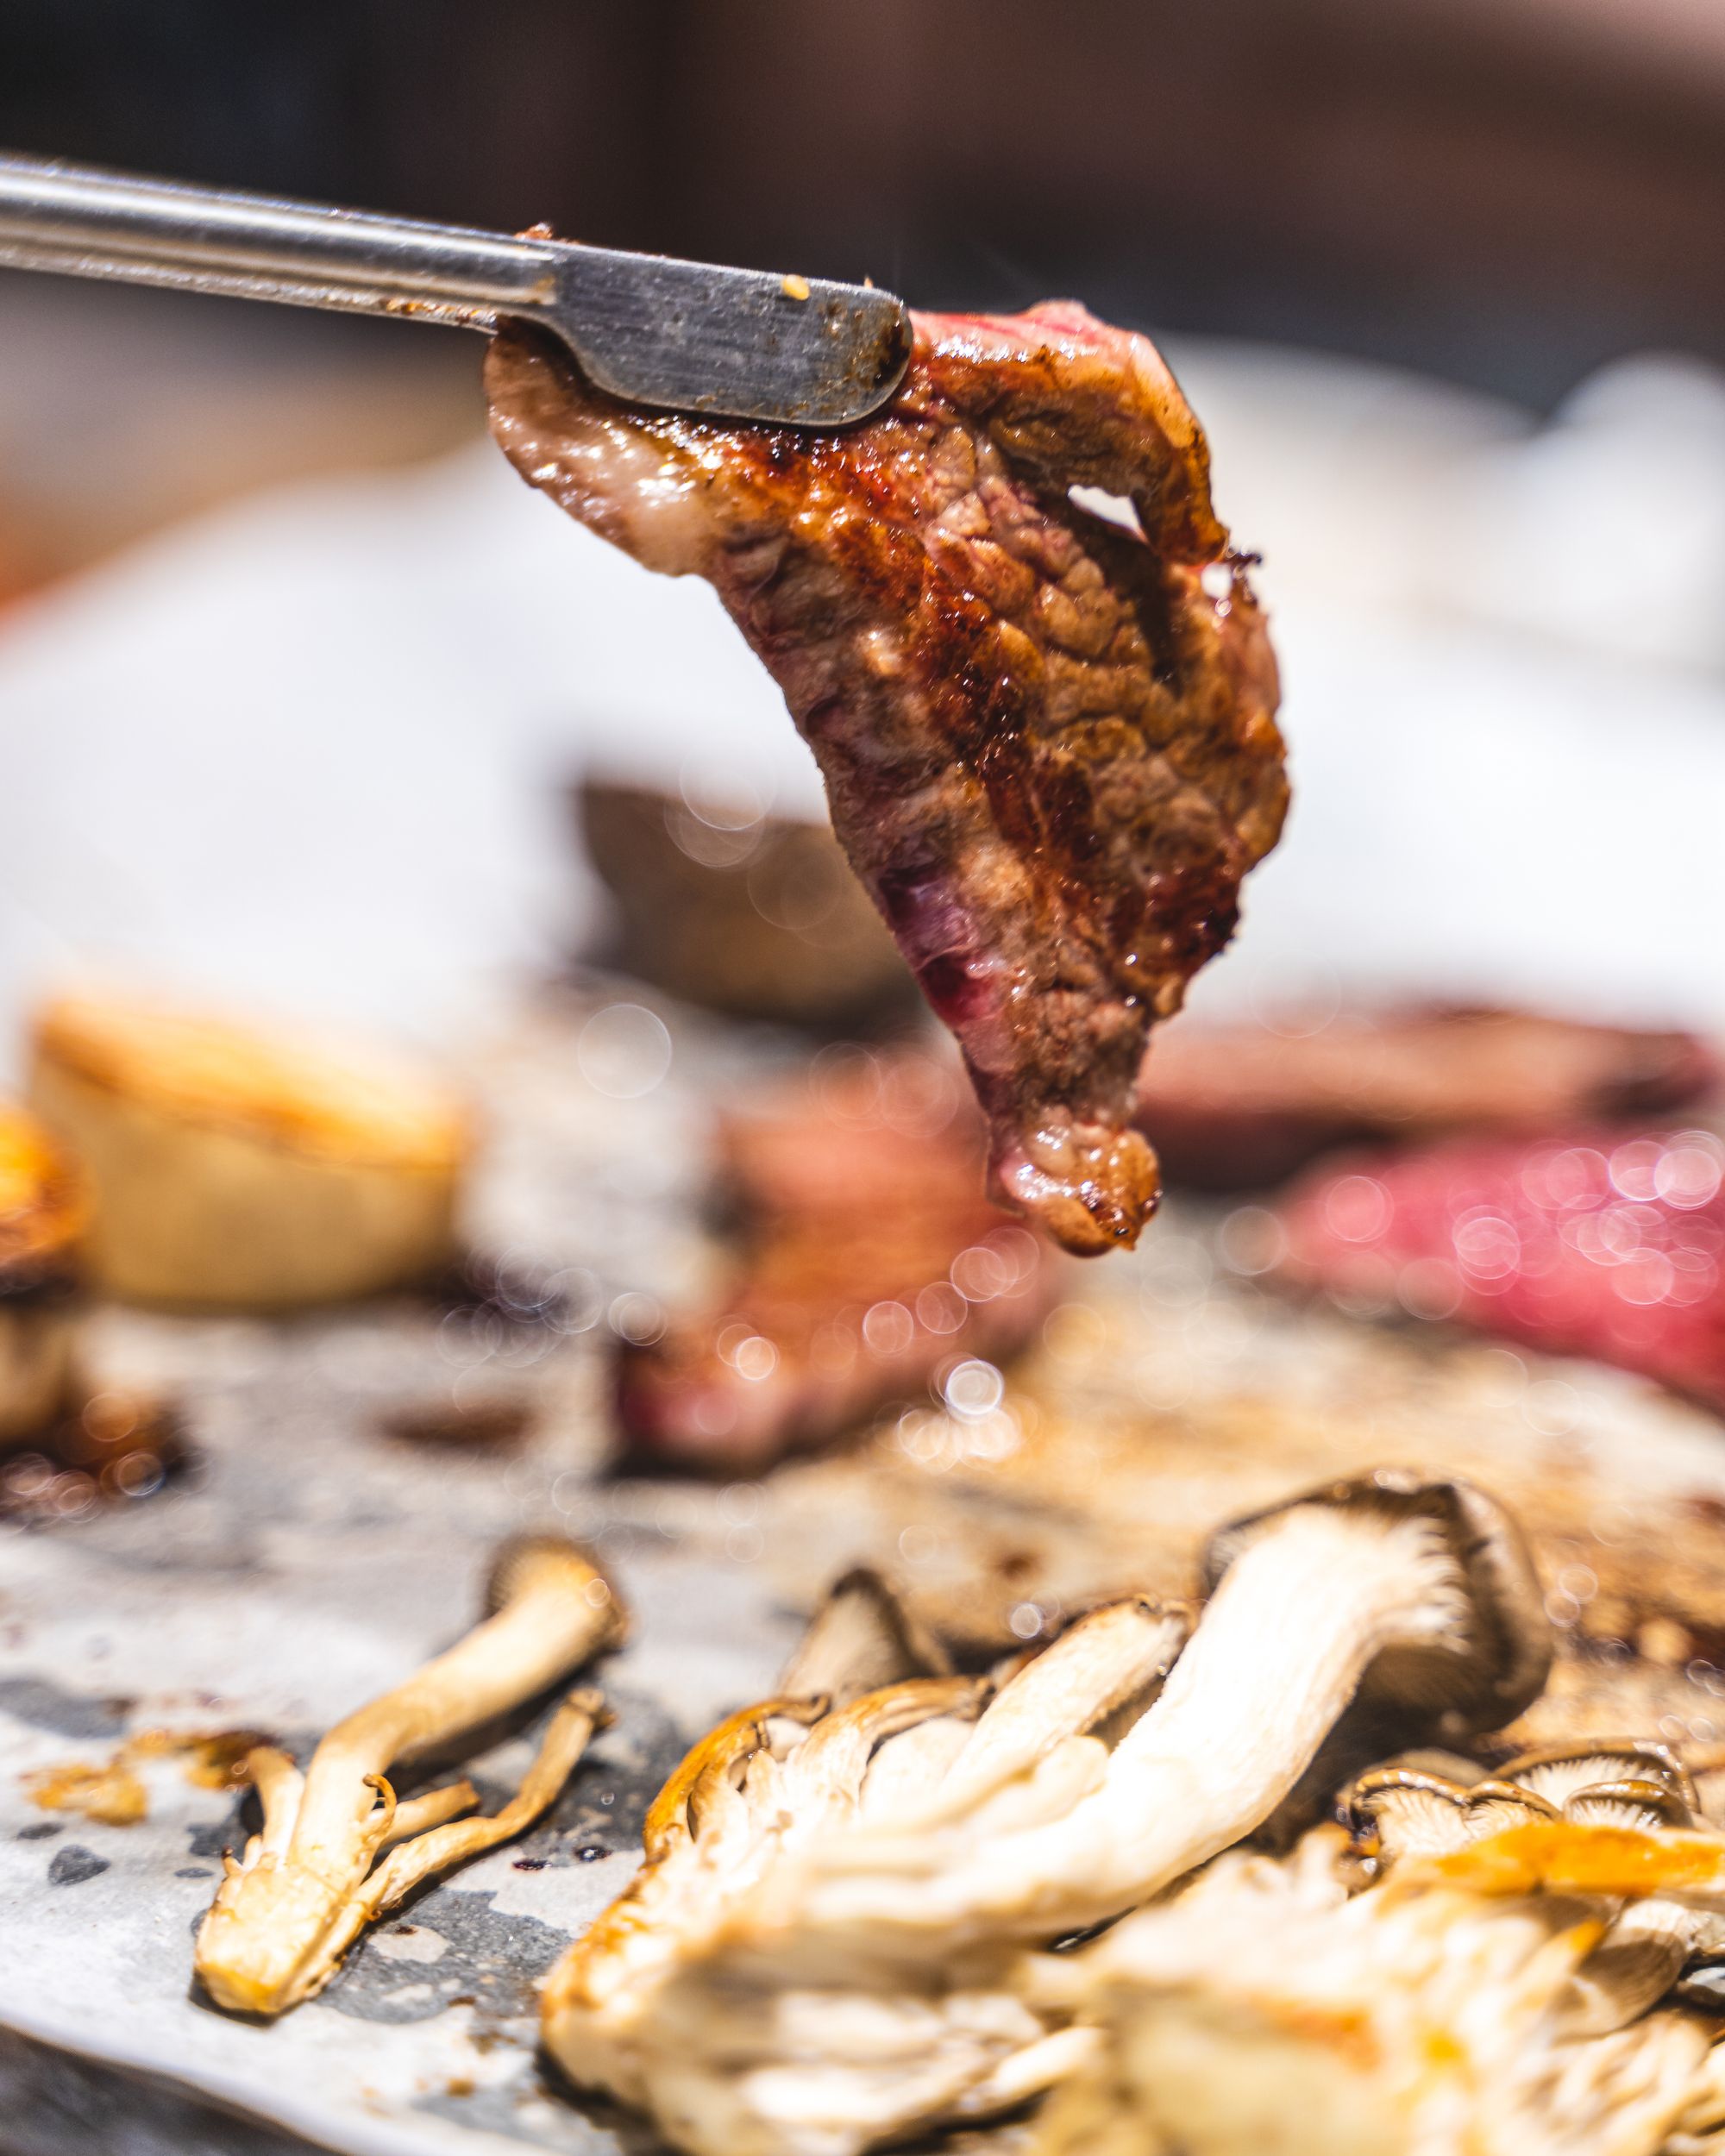 A close up shot of grilled meat being held with tongs